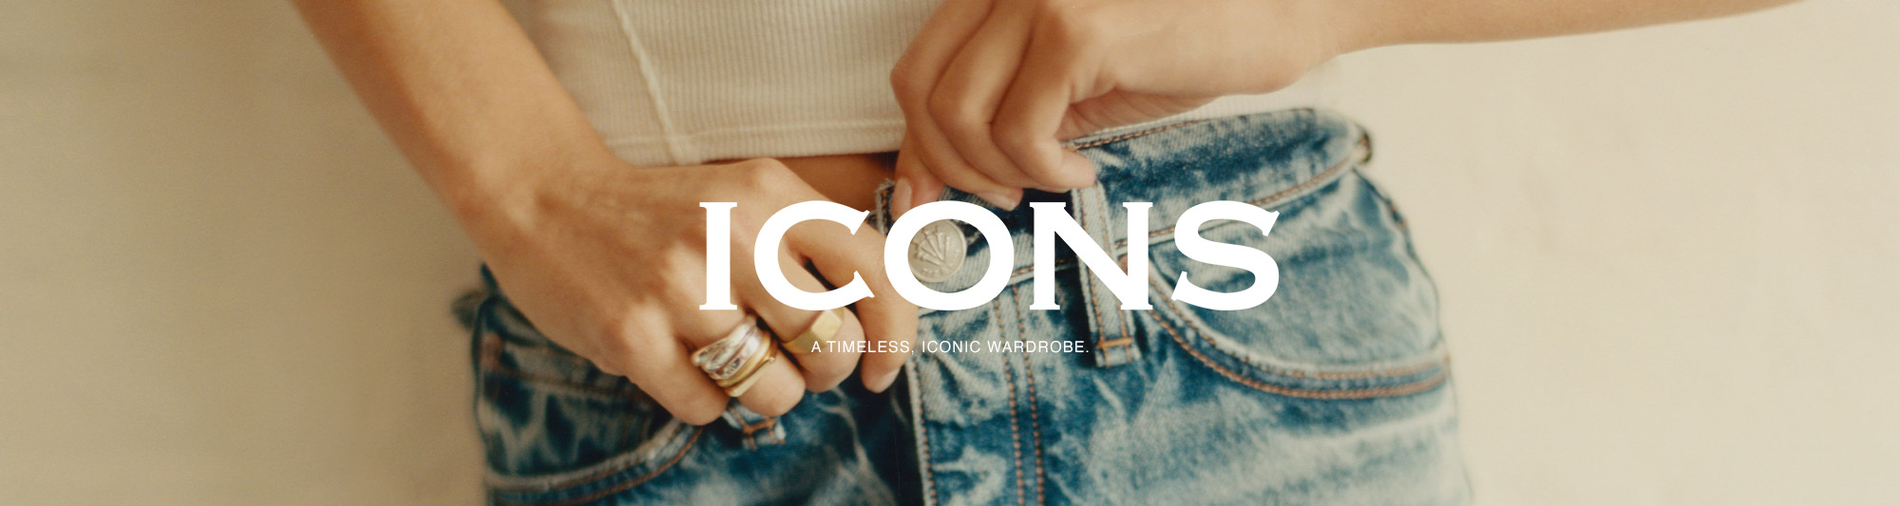 ICONS. A Timeless, Iconic Wardrobe.